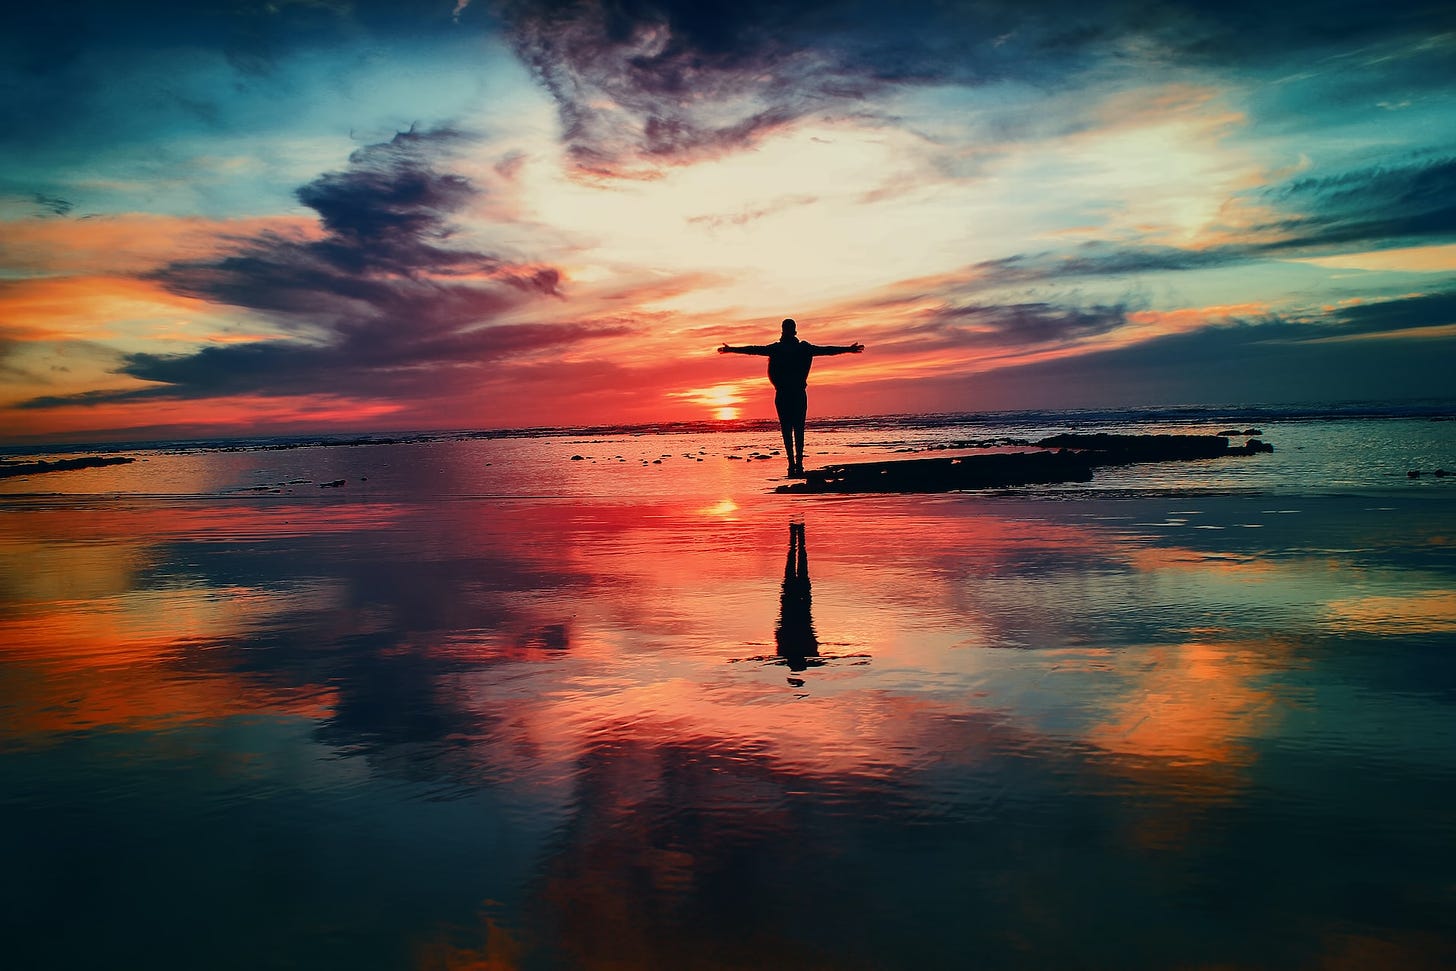 Person on a rock in a reflective body of water with a sunrise or sunset in the background.